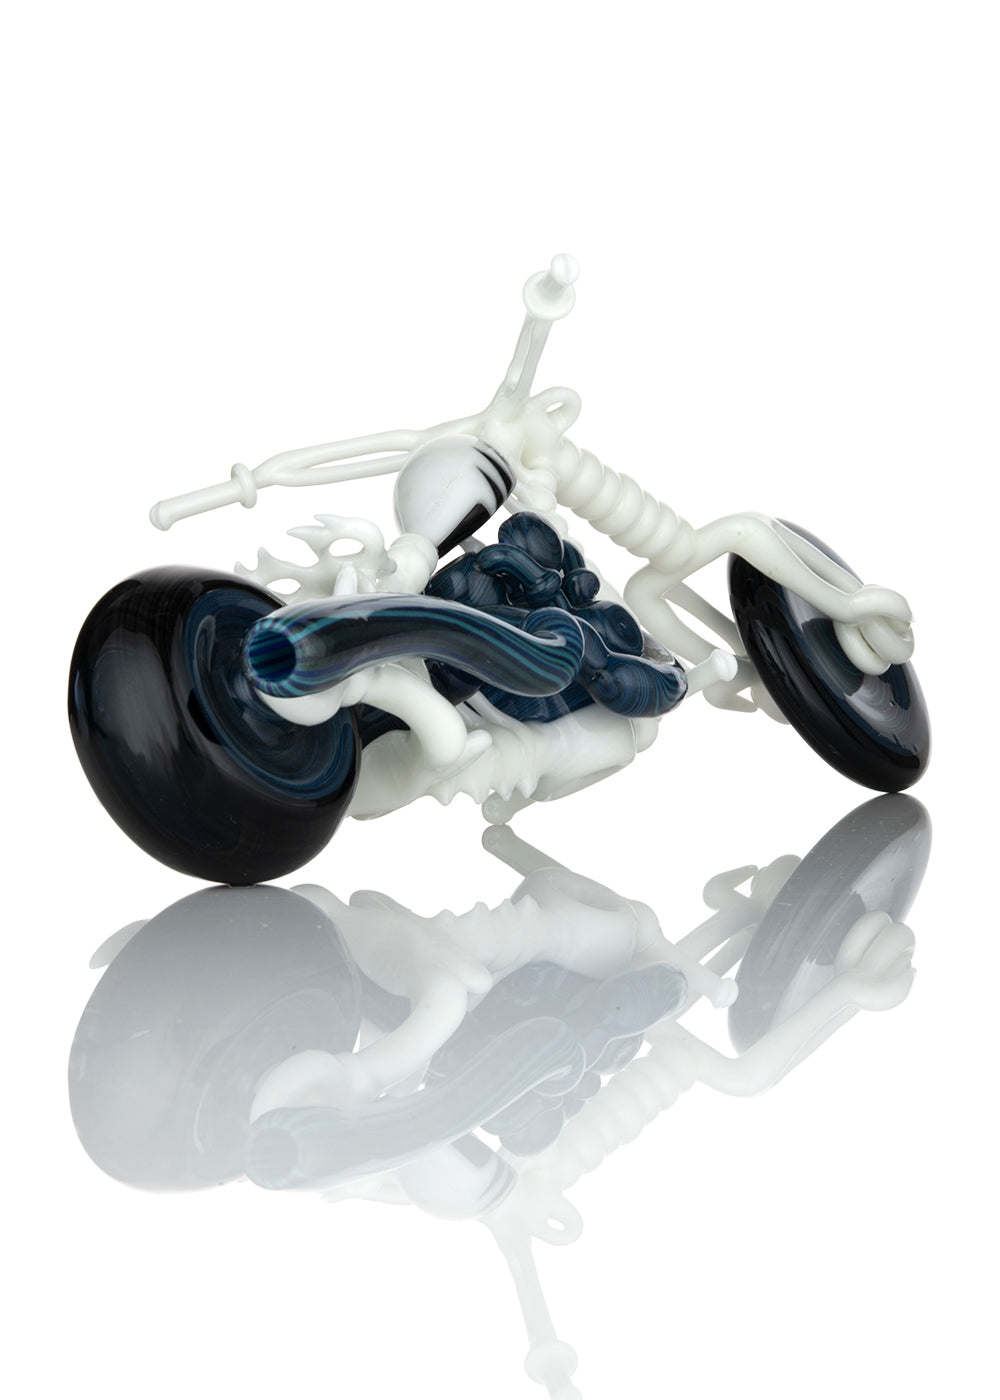 Motorcycle by Banjo Glass